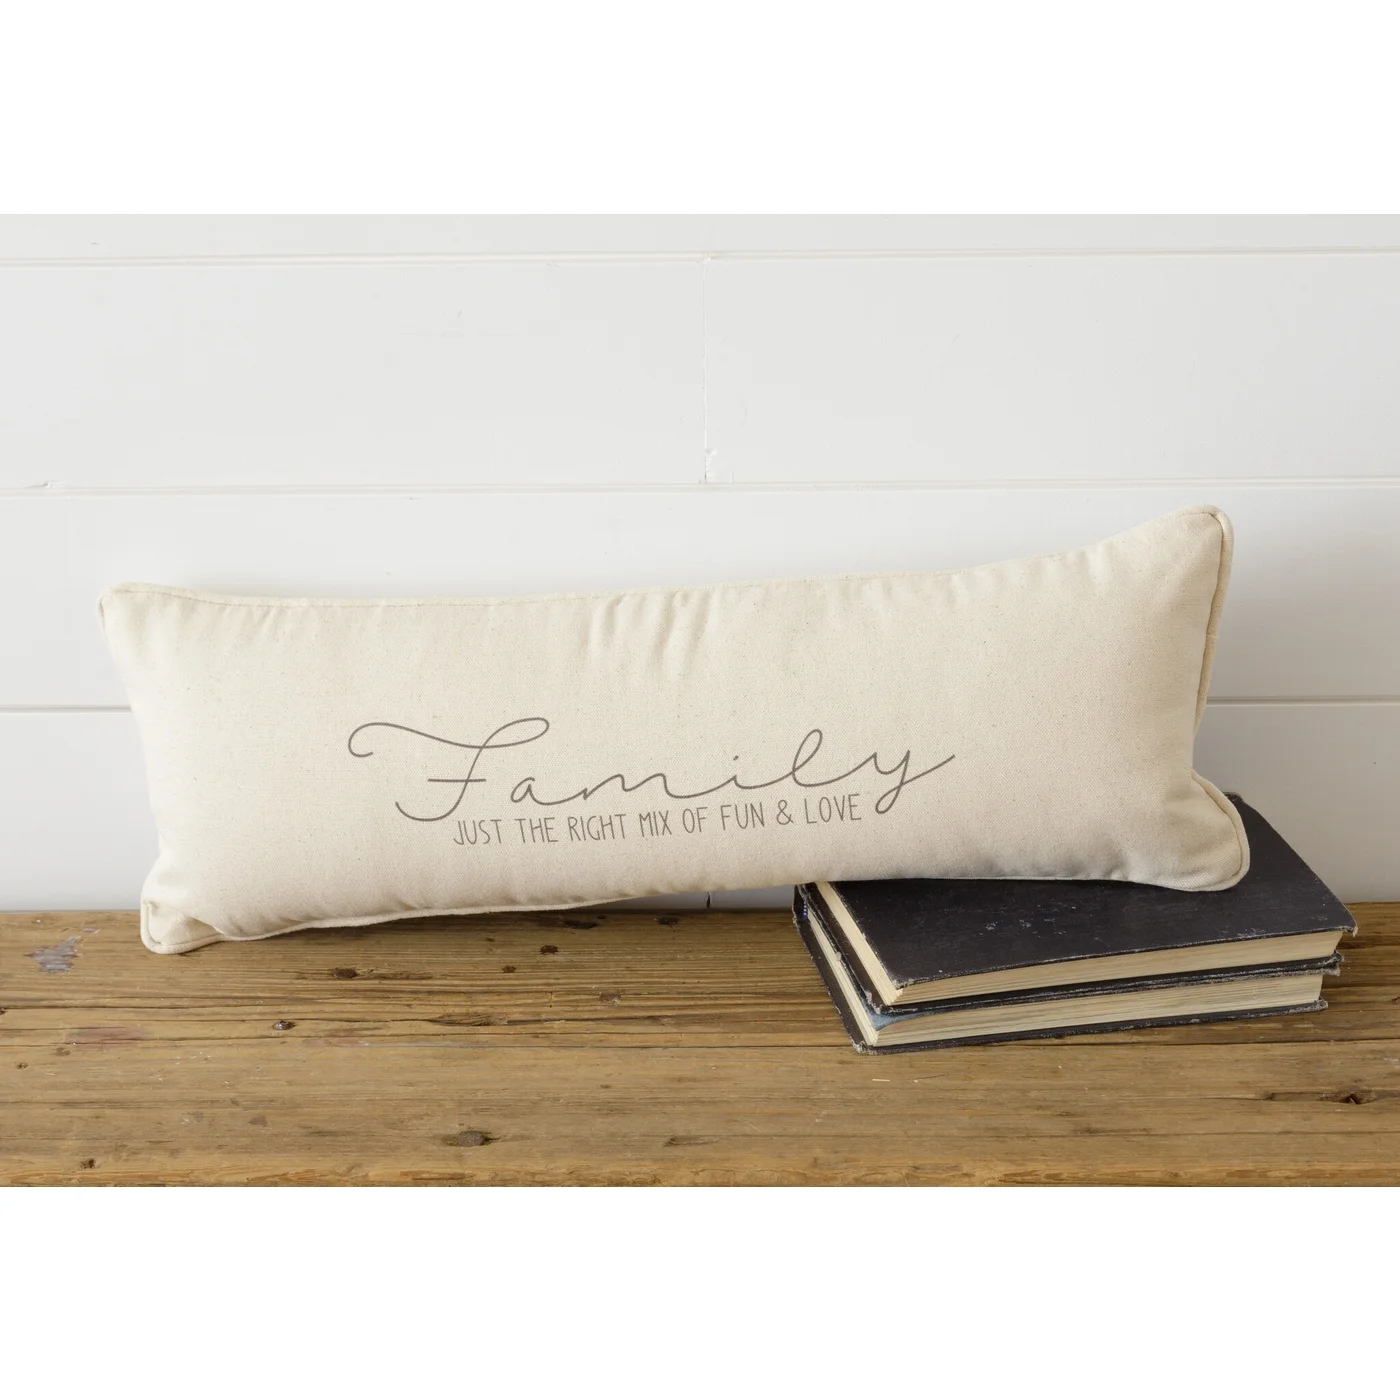 Family Just the Right Mix of Fun & Love Pillow 8" x 22"